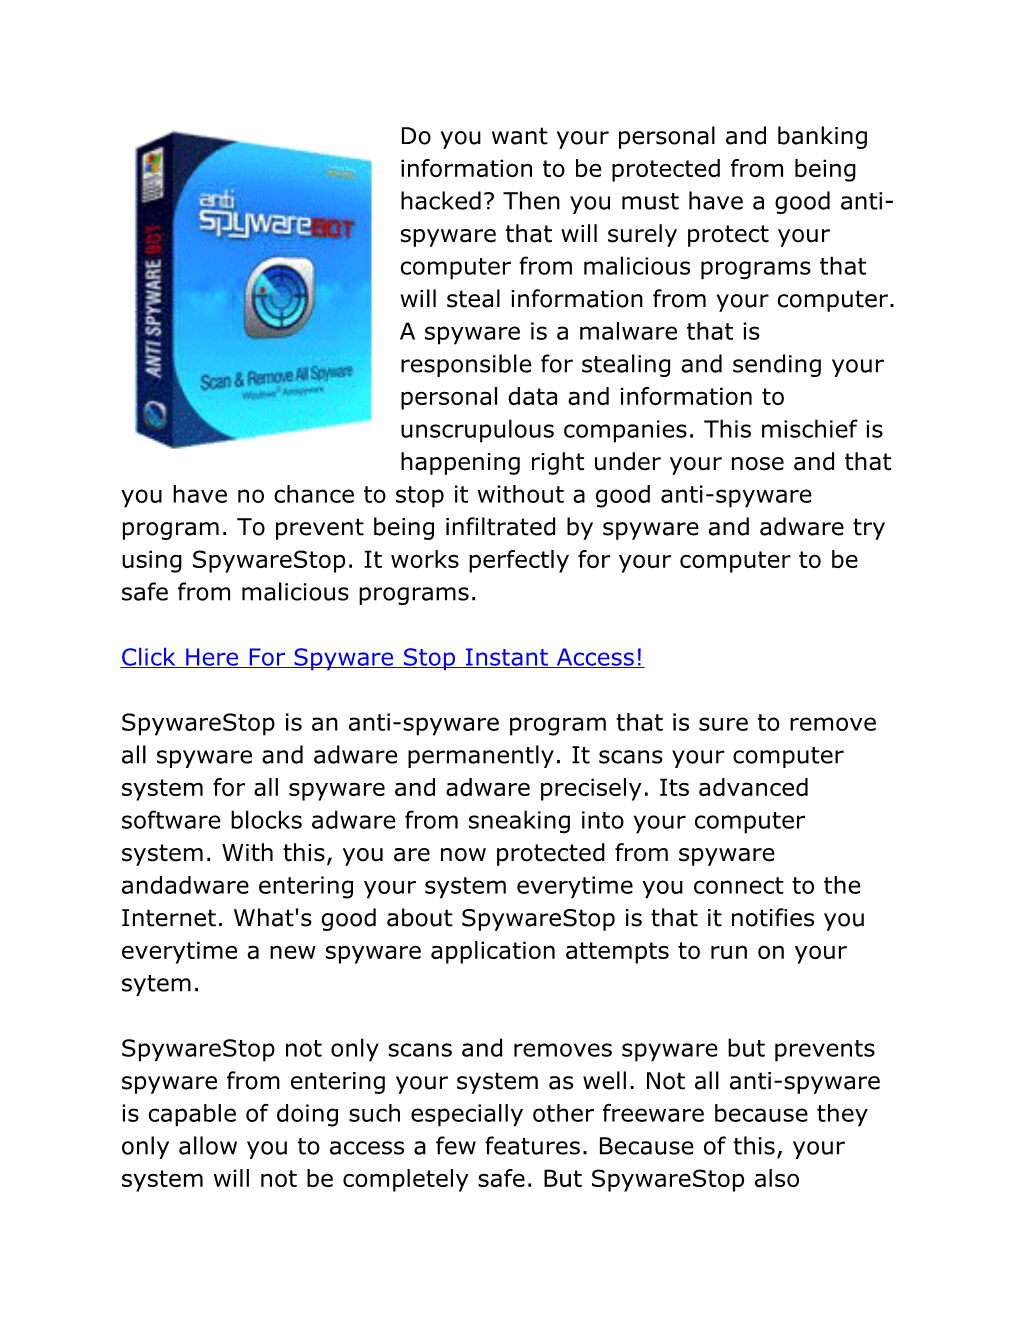 Click Here for Spyware Stop Instant Access!